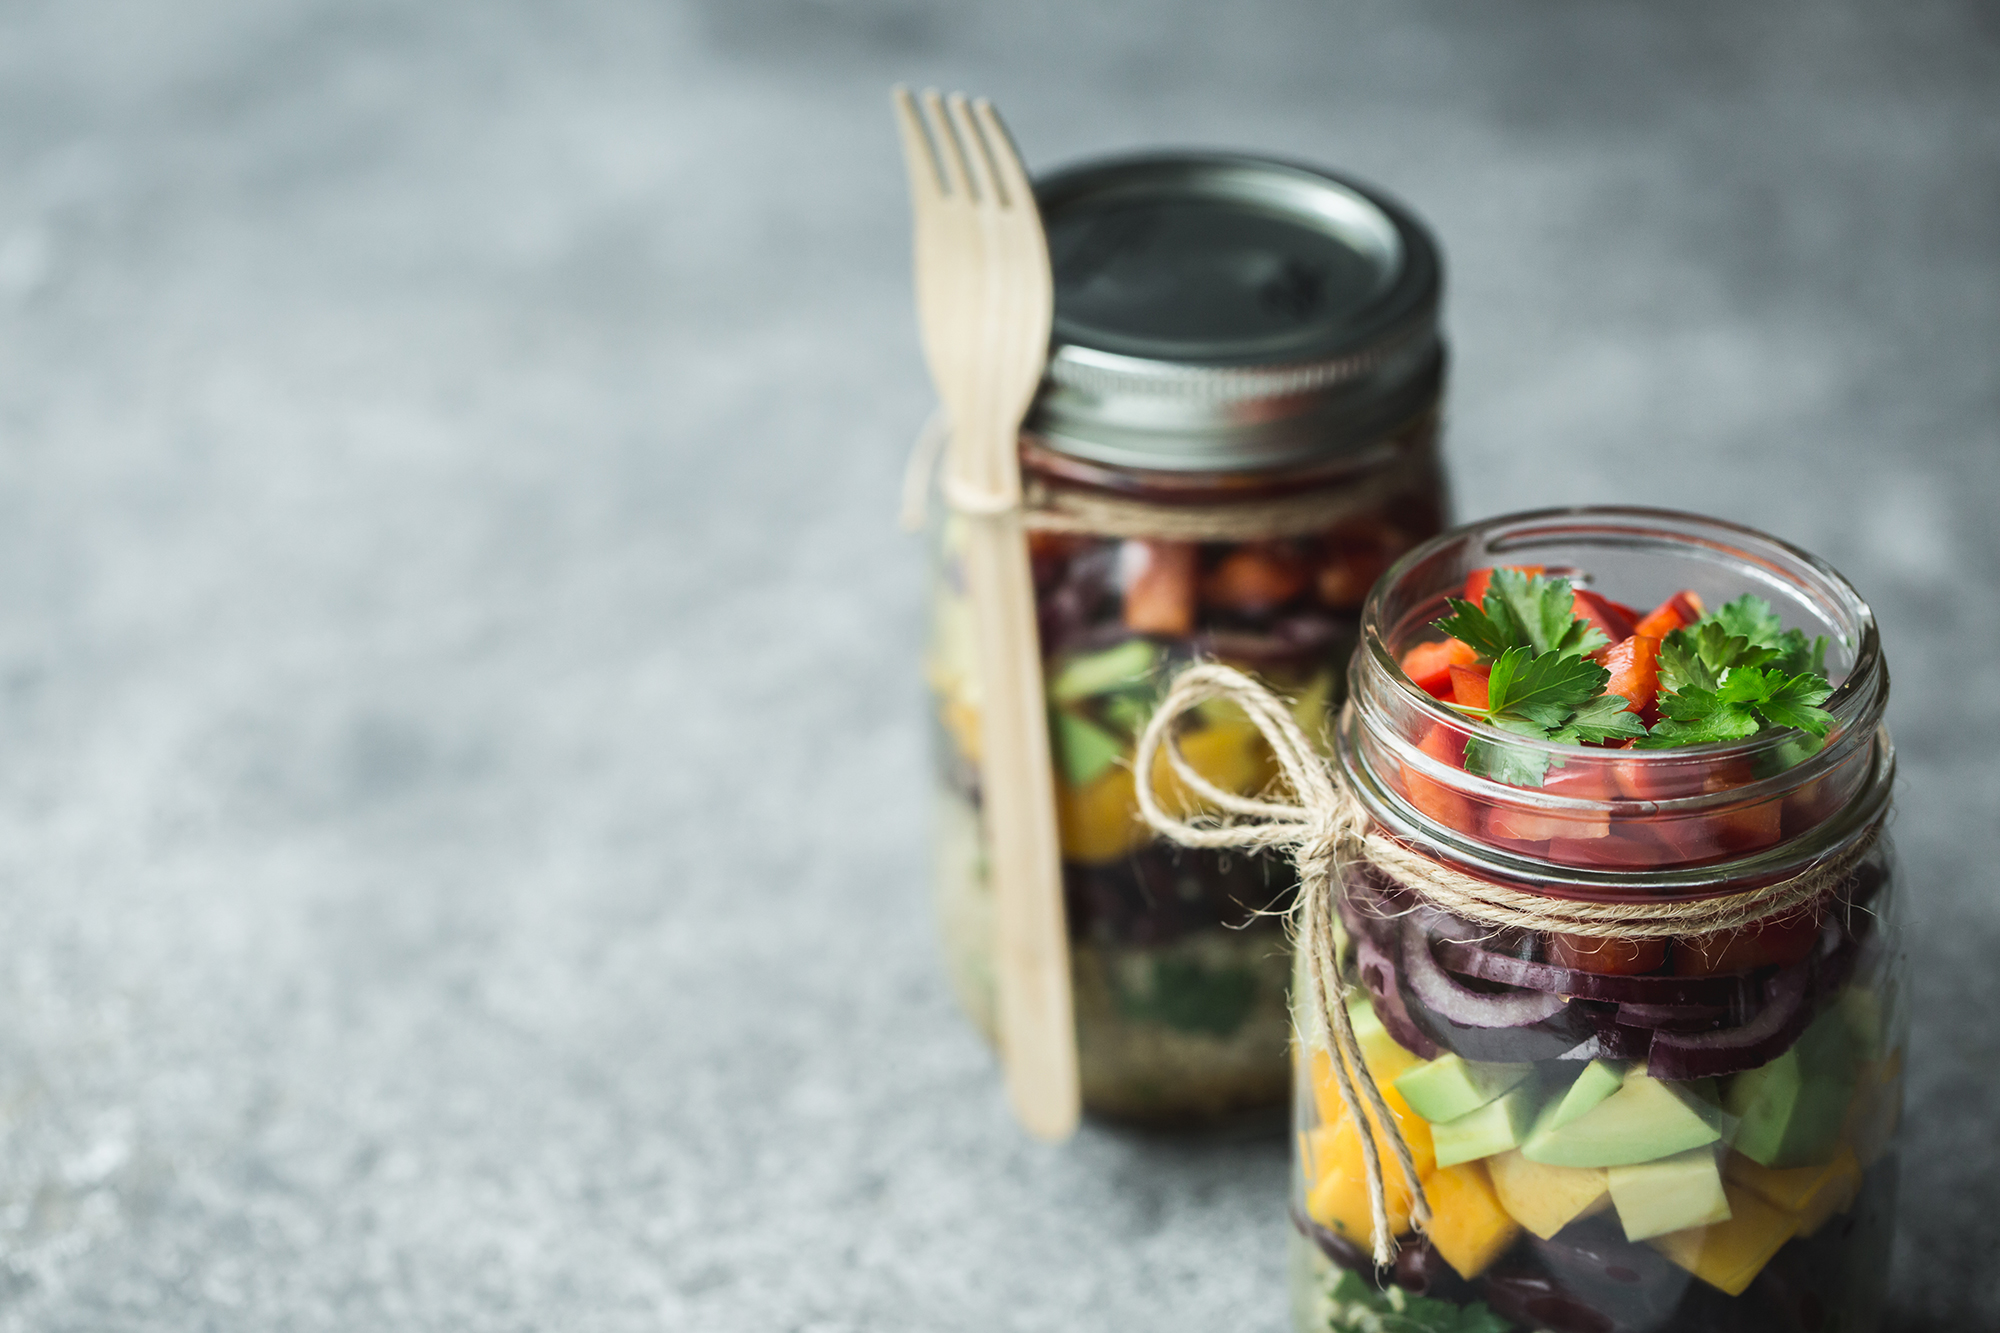 https://www.usmagazine.com/wp-content/uploads/2020/01/Quick-and-Easy-Mason-Jar-Recipe-Ideas-for-Lunch-PROMO.jpg?quality=86&strip=all